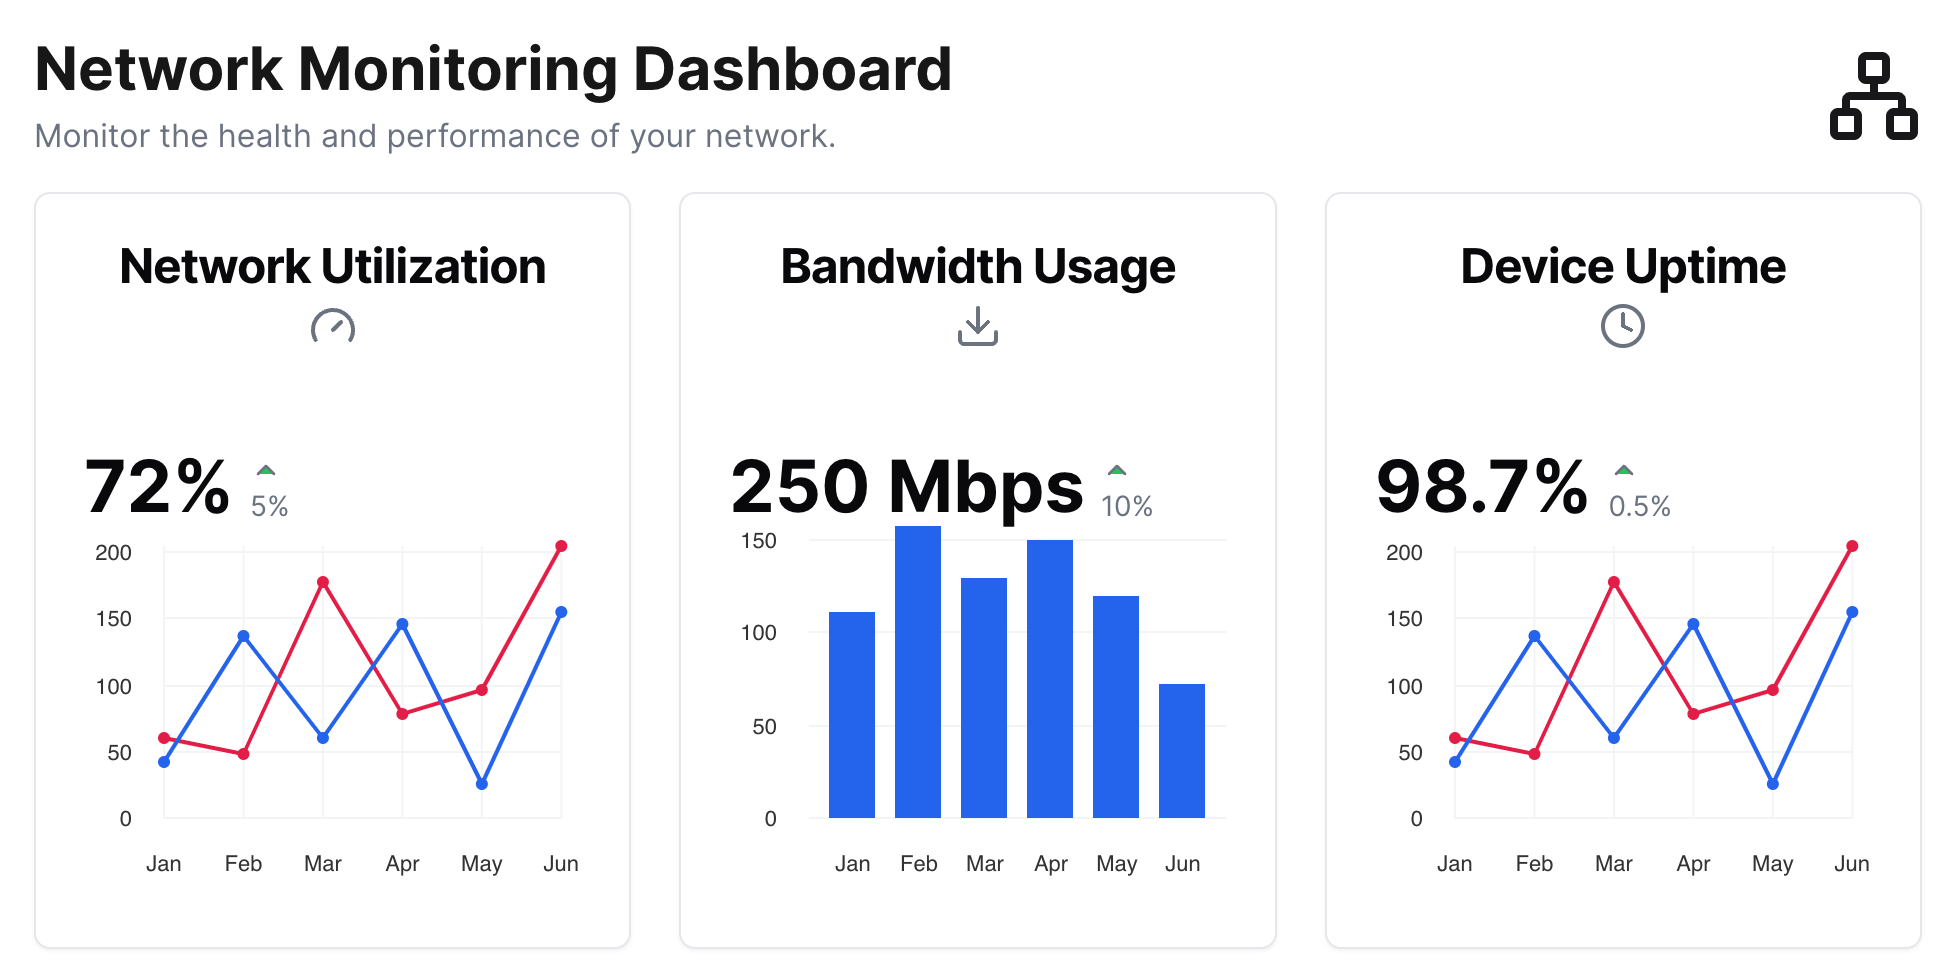 Network Monitoring Dashboard. Monitor the health and performance of your network. 3 cards. 1: Network Utilization. 72%. Arrow up 5%. 2: Bandwidth Usage. 250 Mbps. Arrow up 10%. 3: Device Uptime. 98.7%. Arrow up 0.5%.